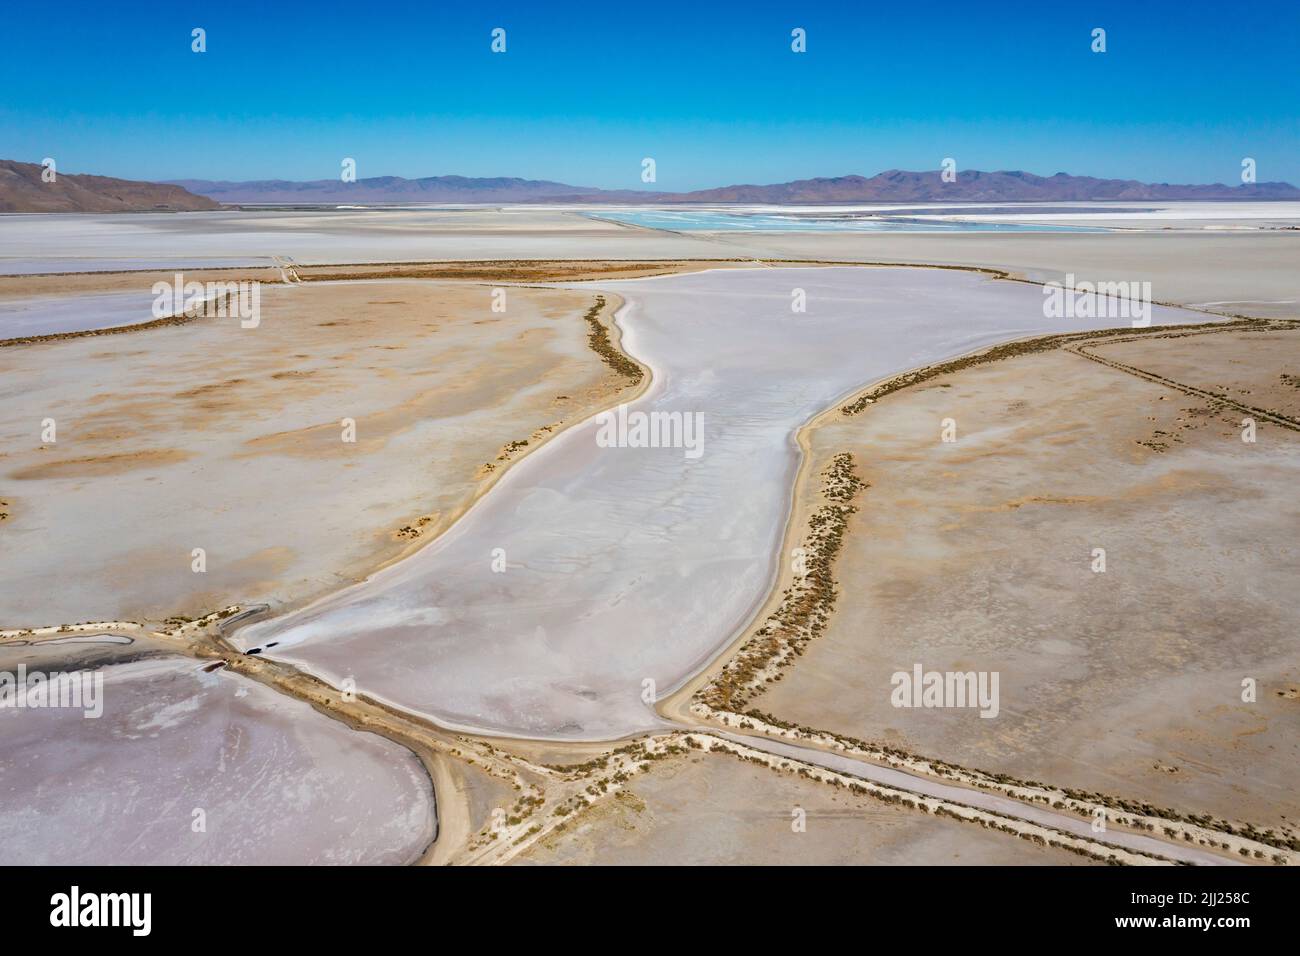 Grantsville, Utah - The Morton Salt facility, where salt is produced by impounding brine in shallow evaporation ponds at the edge of Great Salt Lake. Stock Photo